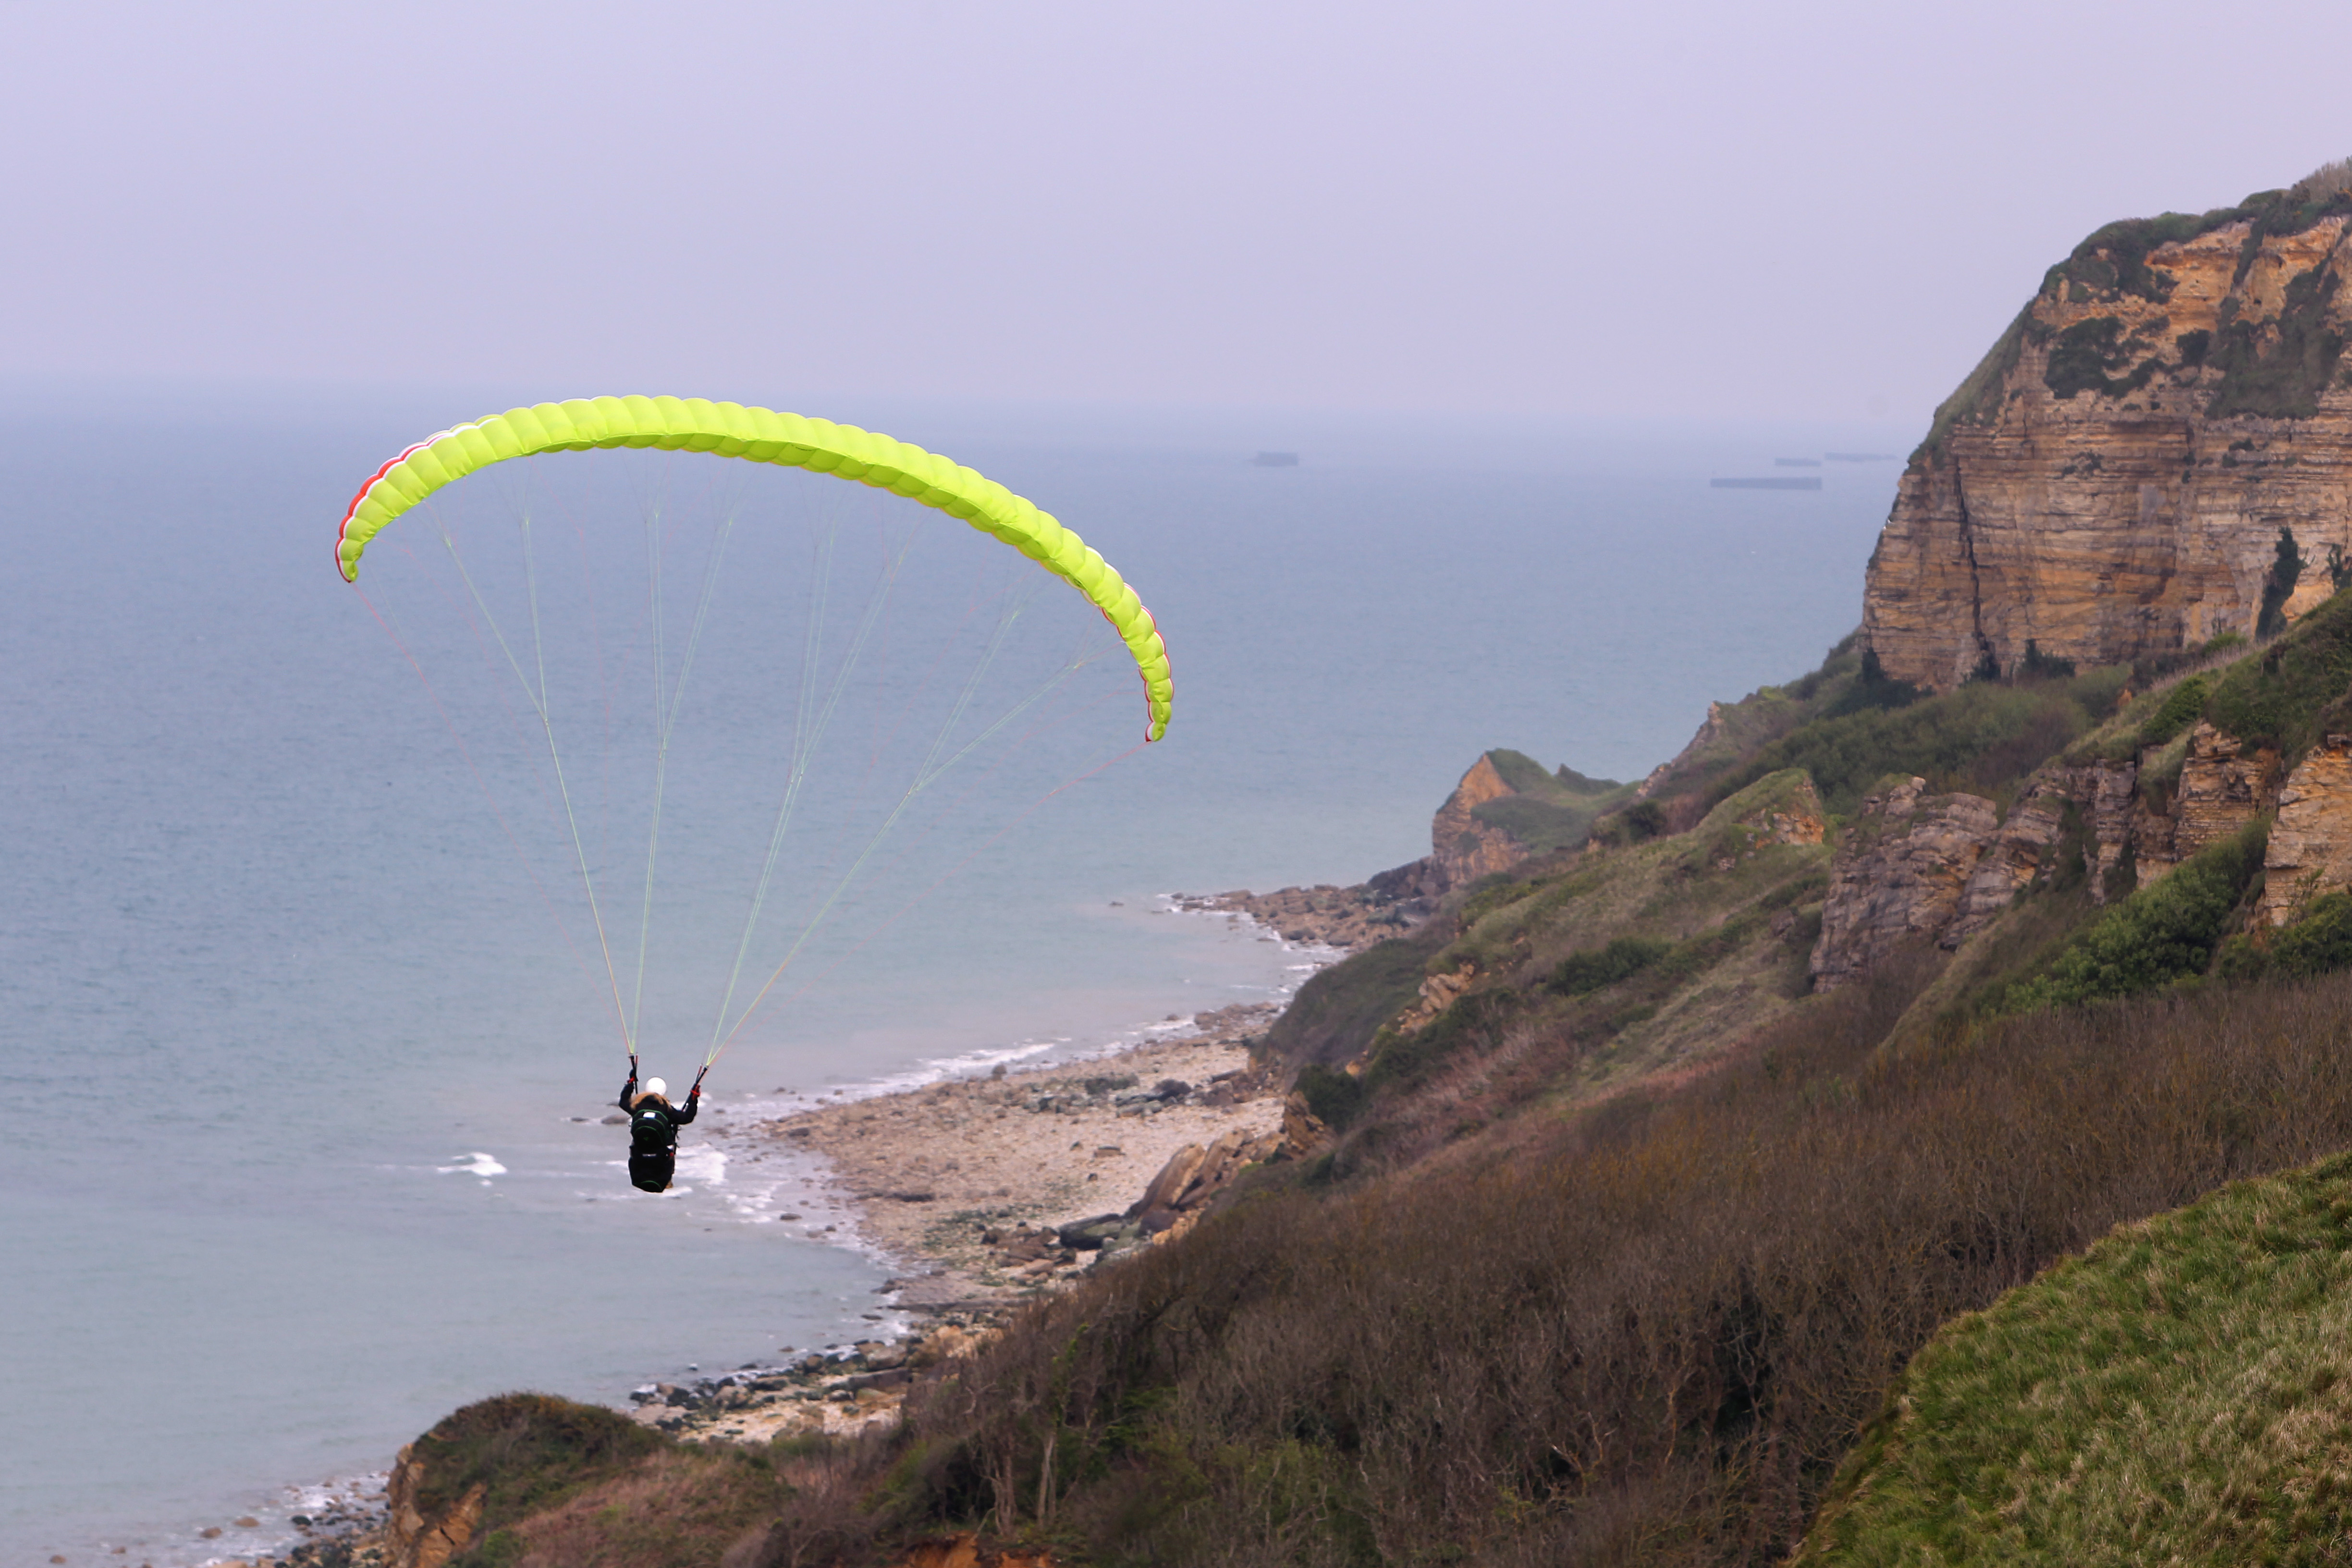 Paragliding tour over the D-Day beaches, in Port en Bessin, western France, Thursday, April 24, 2014Local officials estimate that several hundred thousand tourists will flock to Normandy this summer, attracted by the 70th anniversary of D-Day next June 6. (AP Photo/David Vincent)